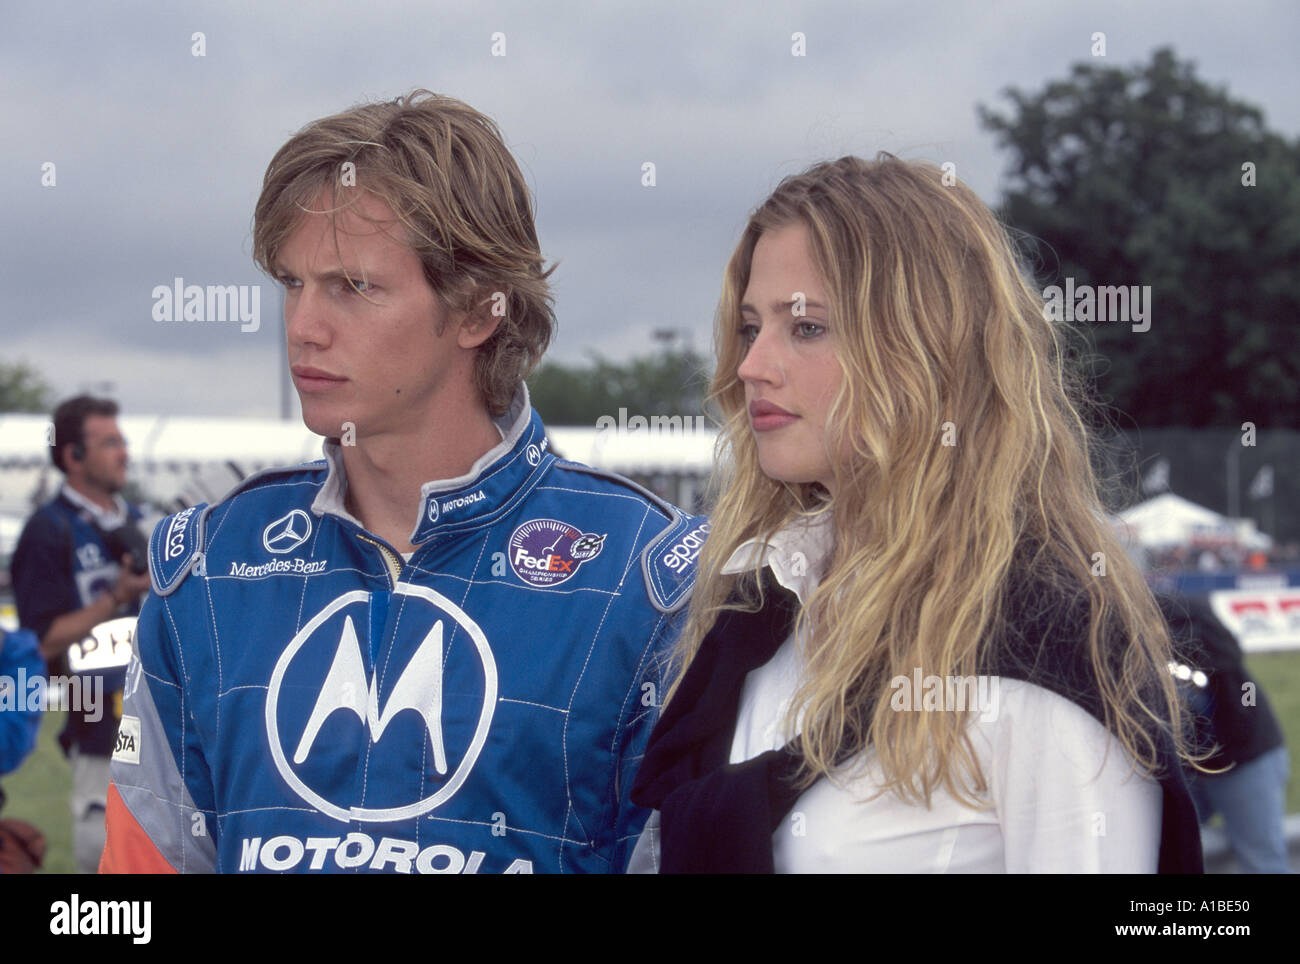 Actors Kip Pardue and Estella Warren during filming of the movie Driven at the Detroit Grand Prix 2000 Stock Photo